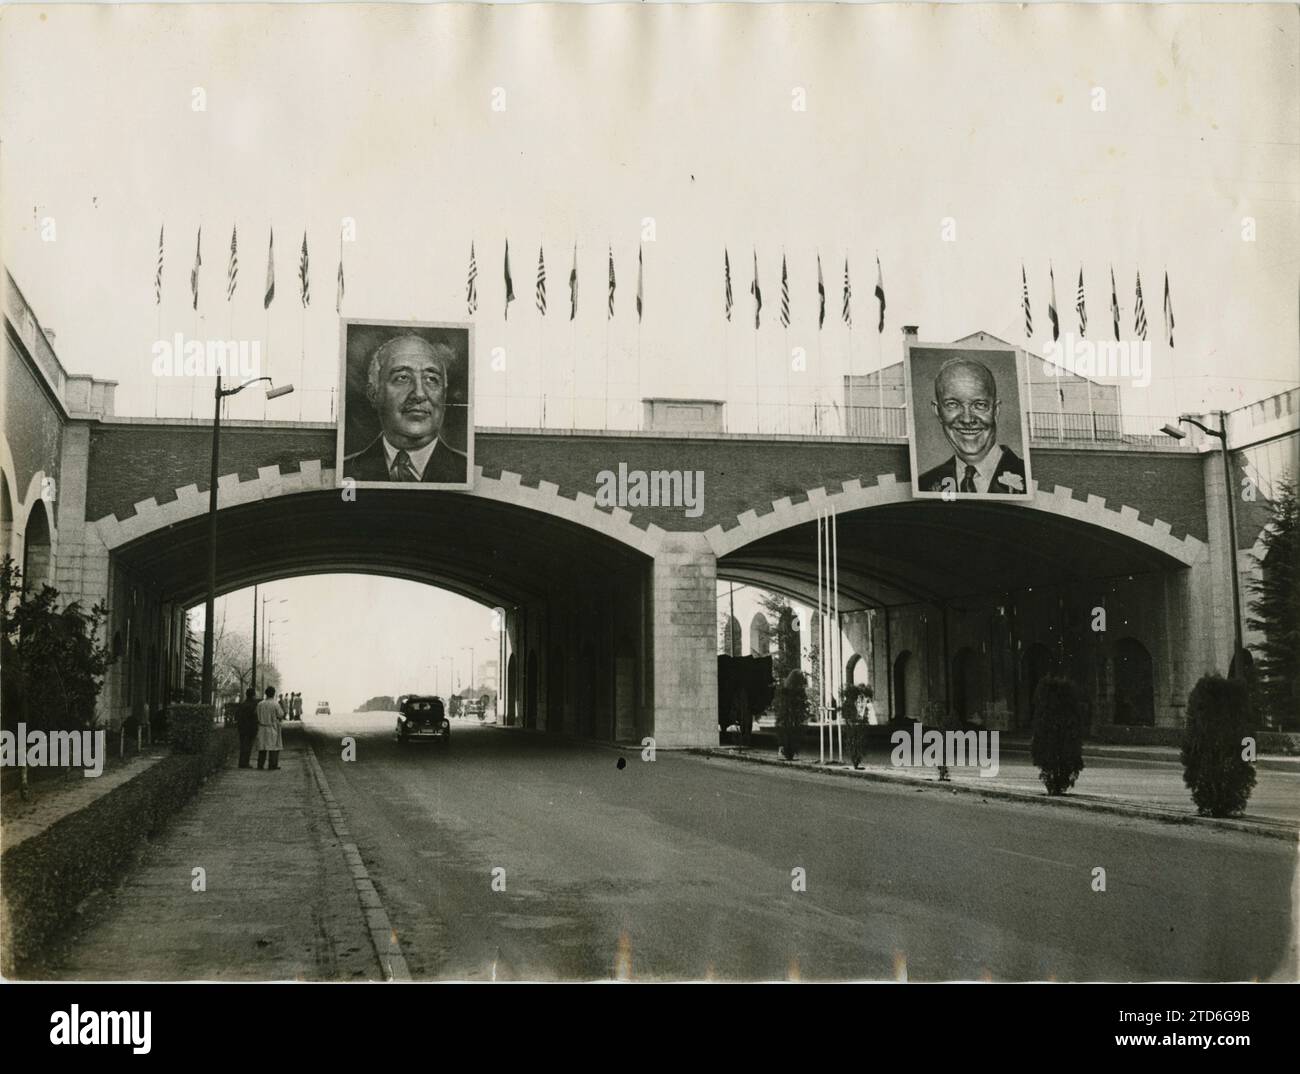 Madrid, 12/19/1959. On the eve of the arrival of North American President Dwight D. Eisenhower to Spain, the first by a United States president. The authorities devoted themselves to this visit, essential in a Spain that needed to open up to the outside world. In the photograph, the portraits of Eisenhower and Franco on the CEA bridge, over the Barajas highway. Credit: Album / Archivo ABC / Teodoro Naranjo Domínguez Stock Photo